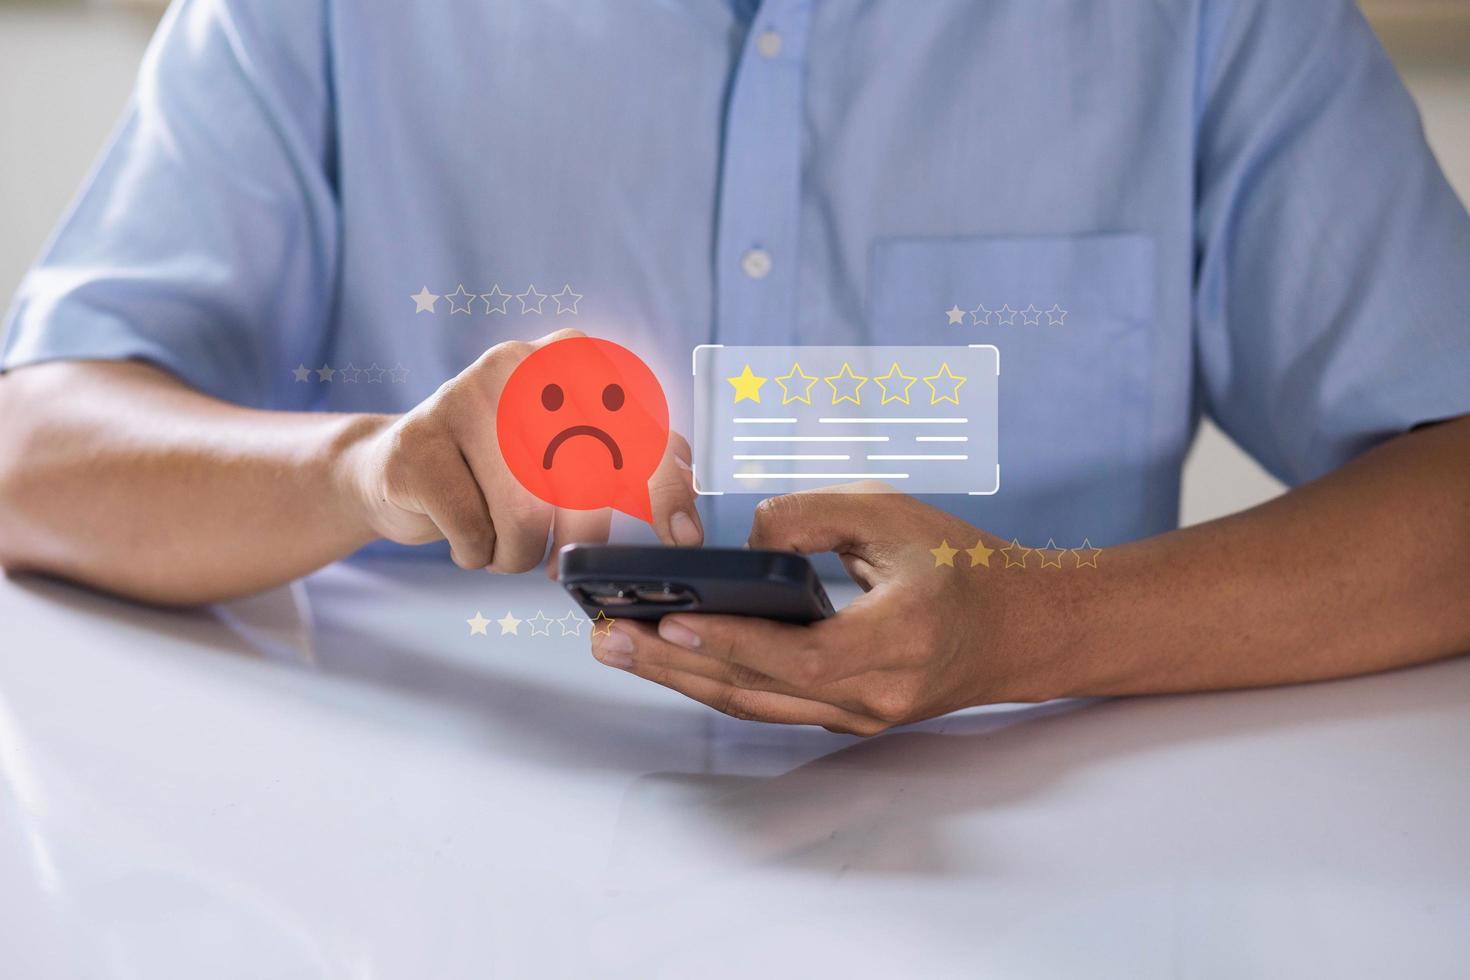 Customer services bad excellent rating experience online. User giving 1-star and sad face for satisfaction survey evaluation product service quality, satisfaction feedback review, bad quality photo